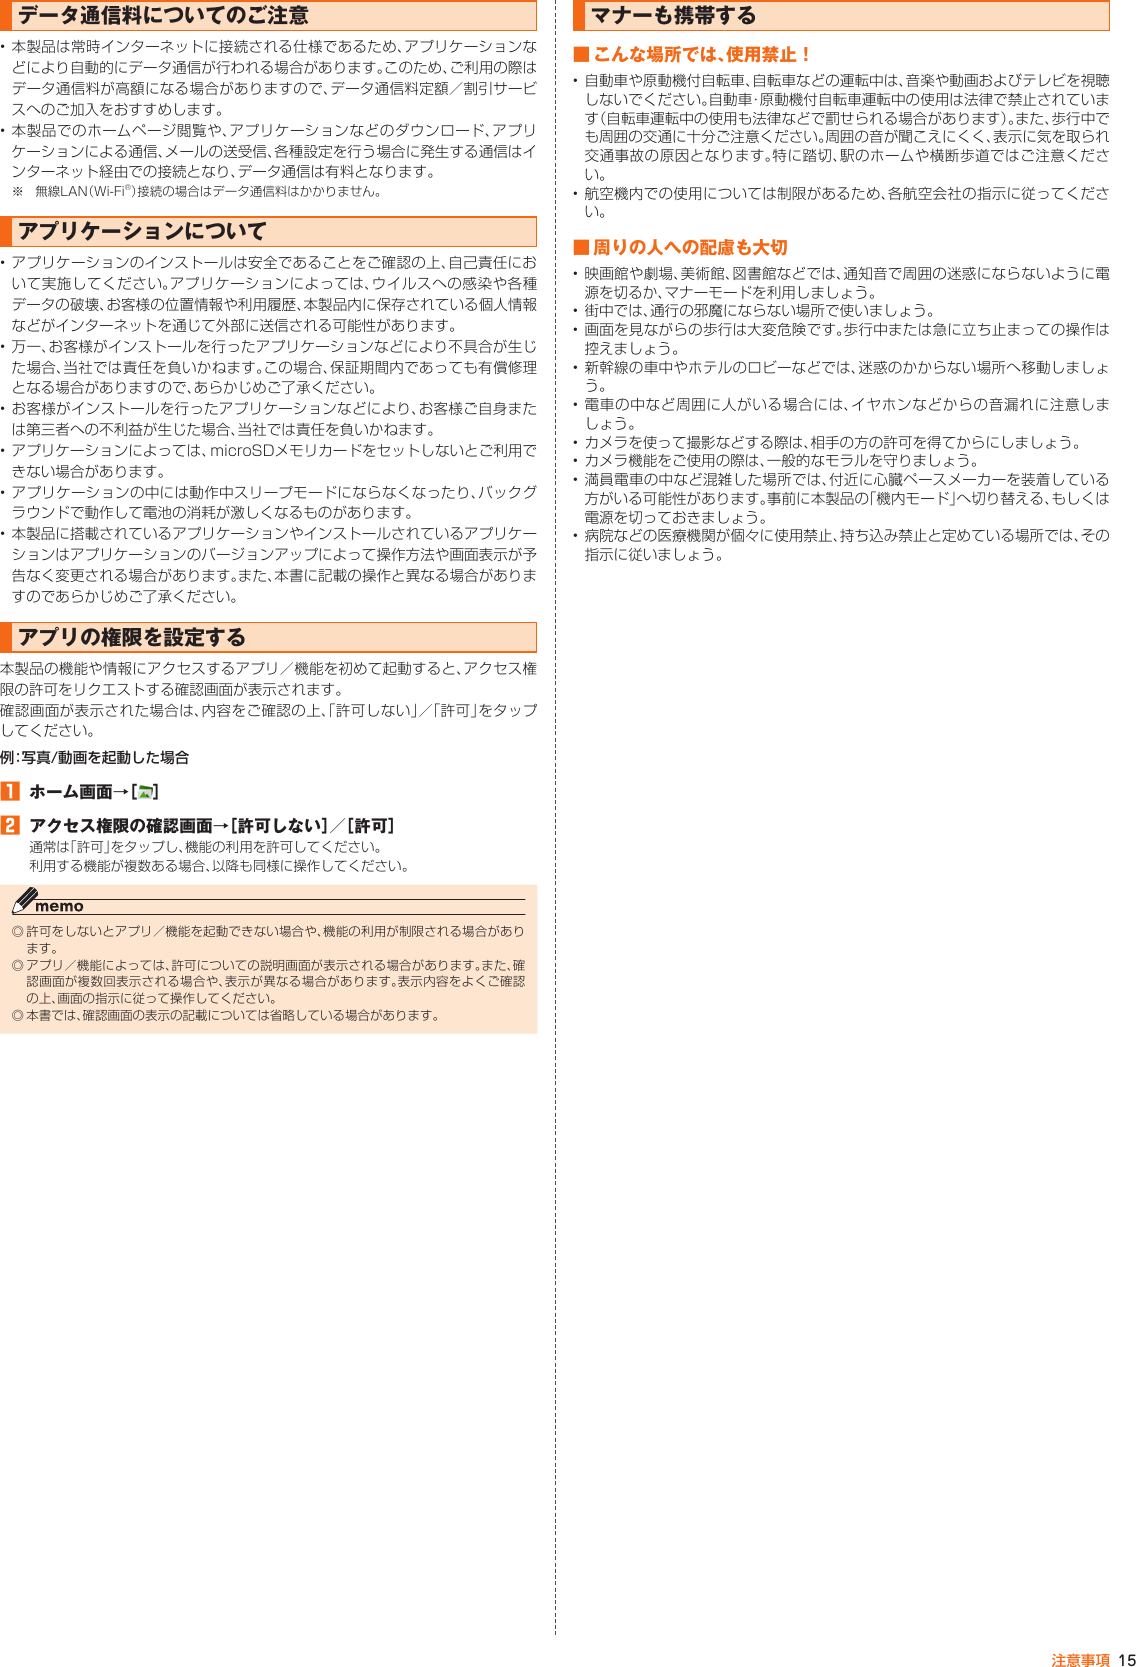 Page 16 of Kyocera FA85 Tablet User Manual 2